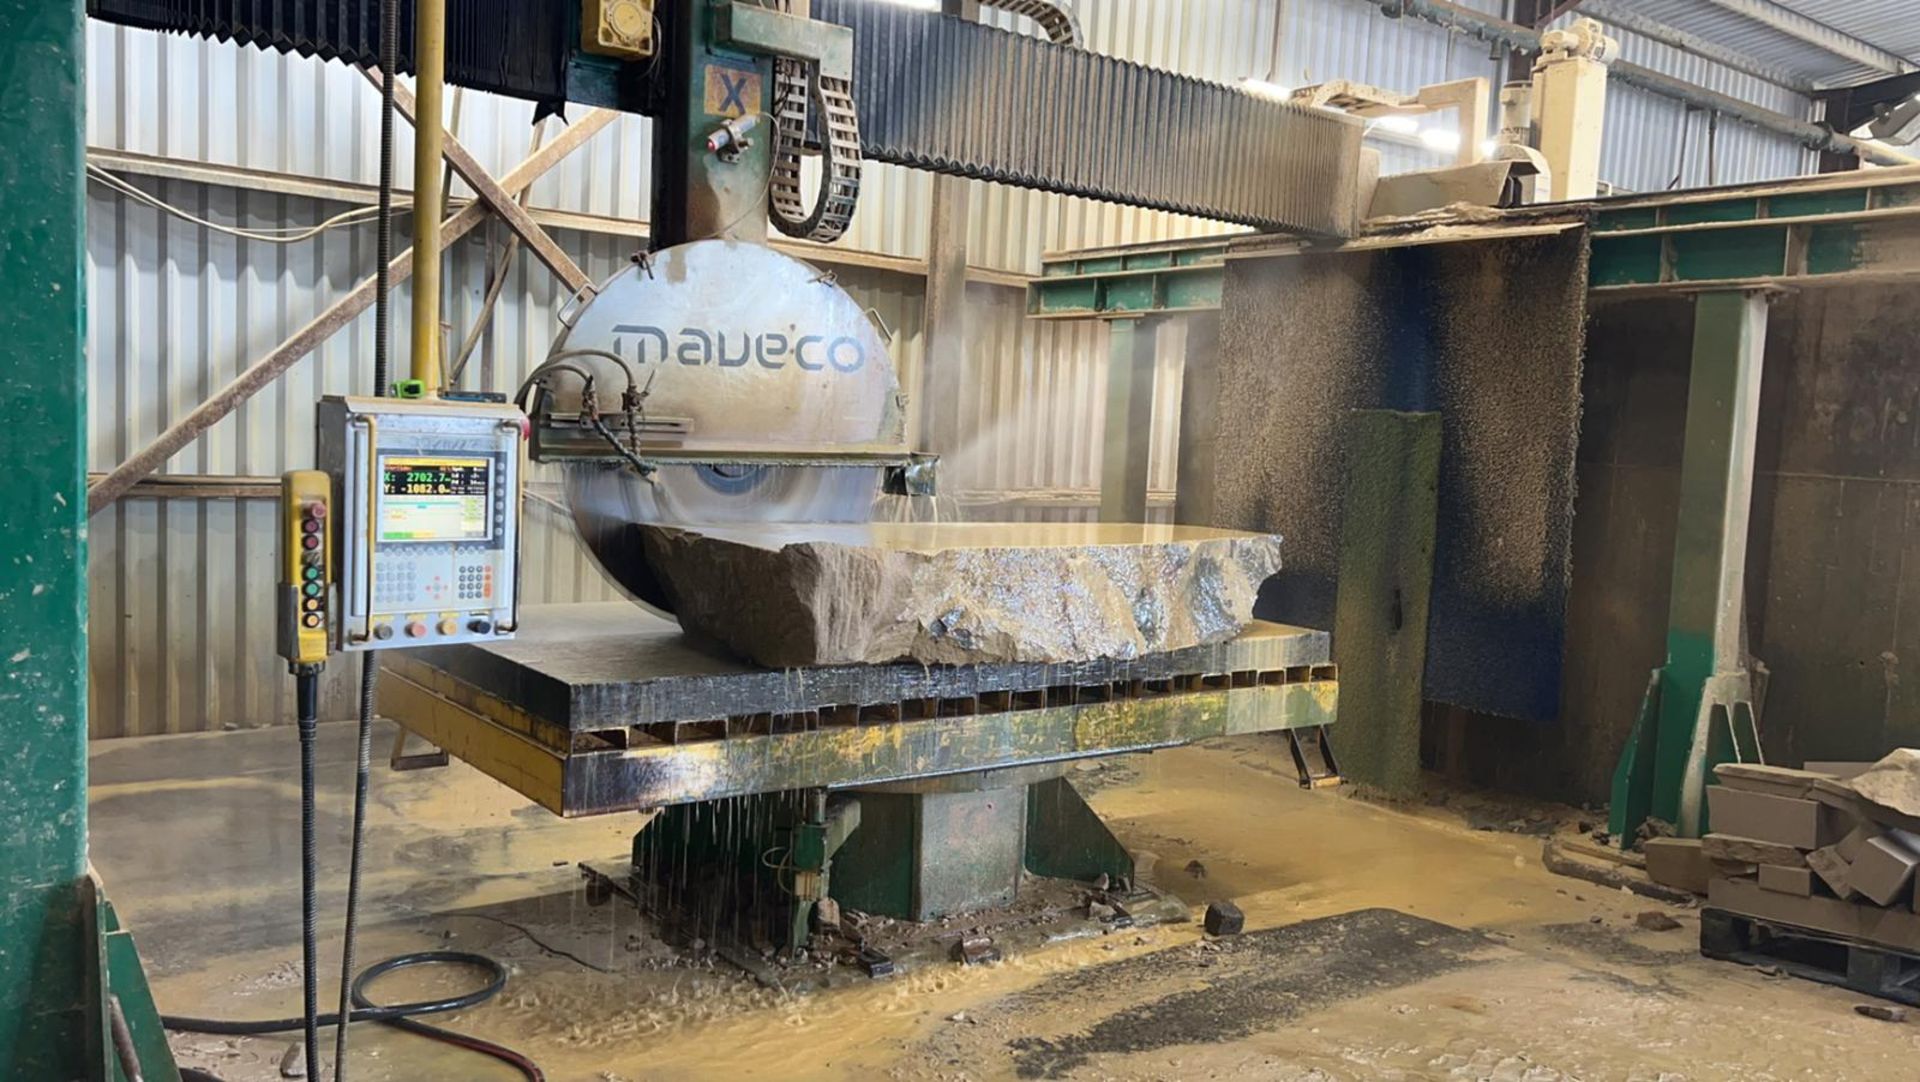 Maveco 1200 automatic Stone Saw Still in use every day Good condition  cuts like new well serviced - Bild 4 aus 6